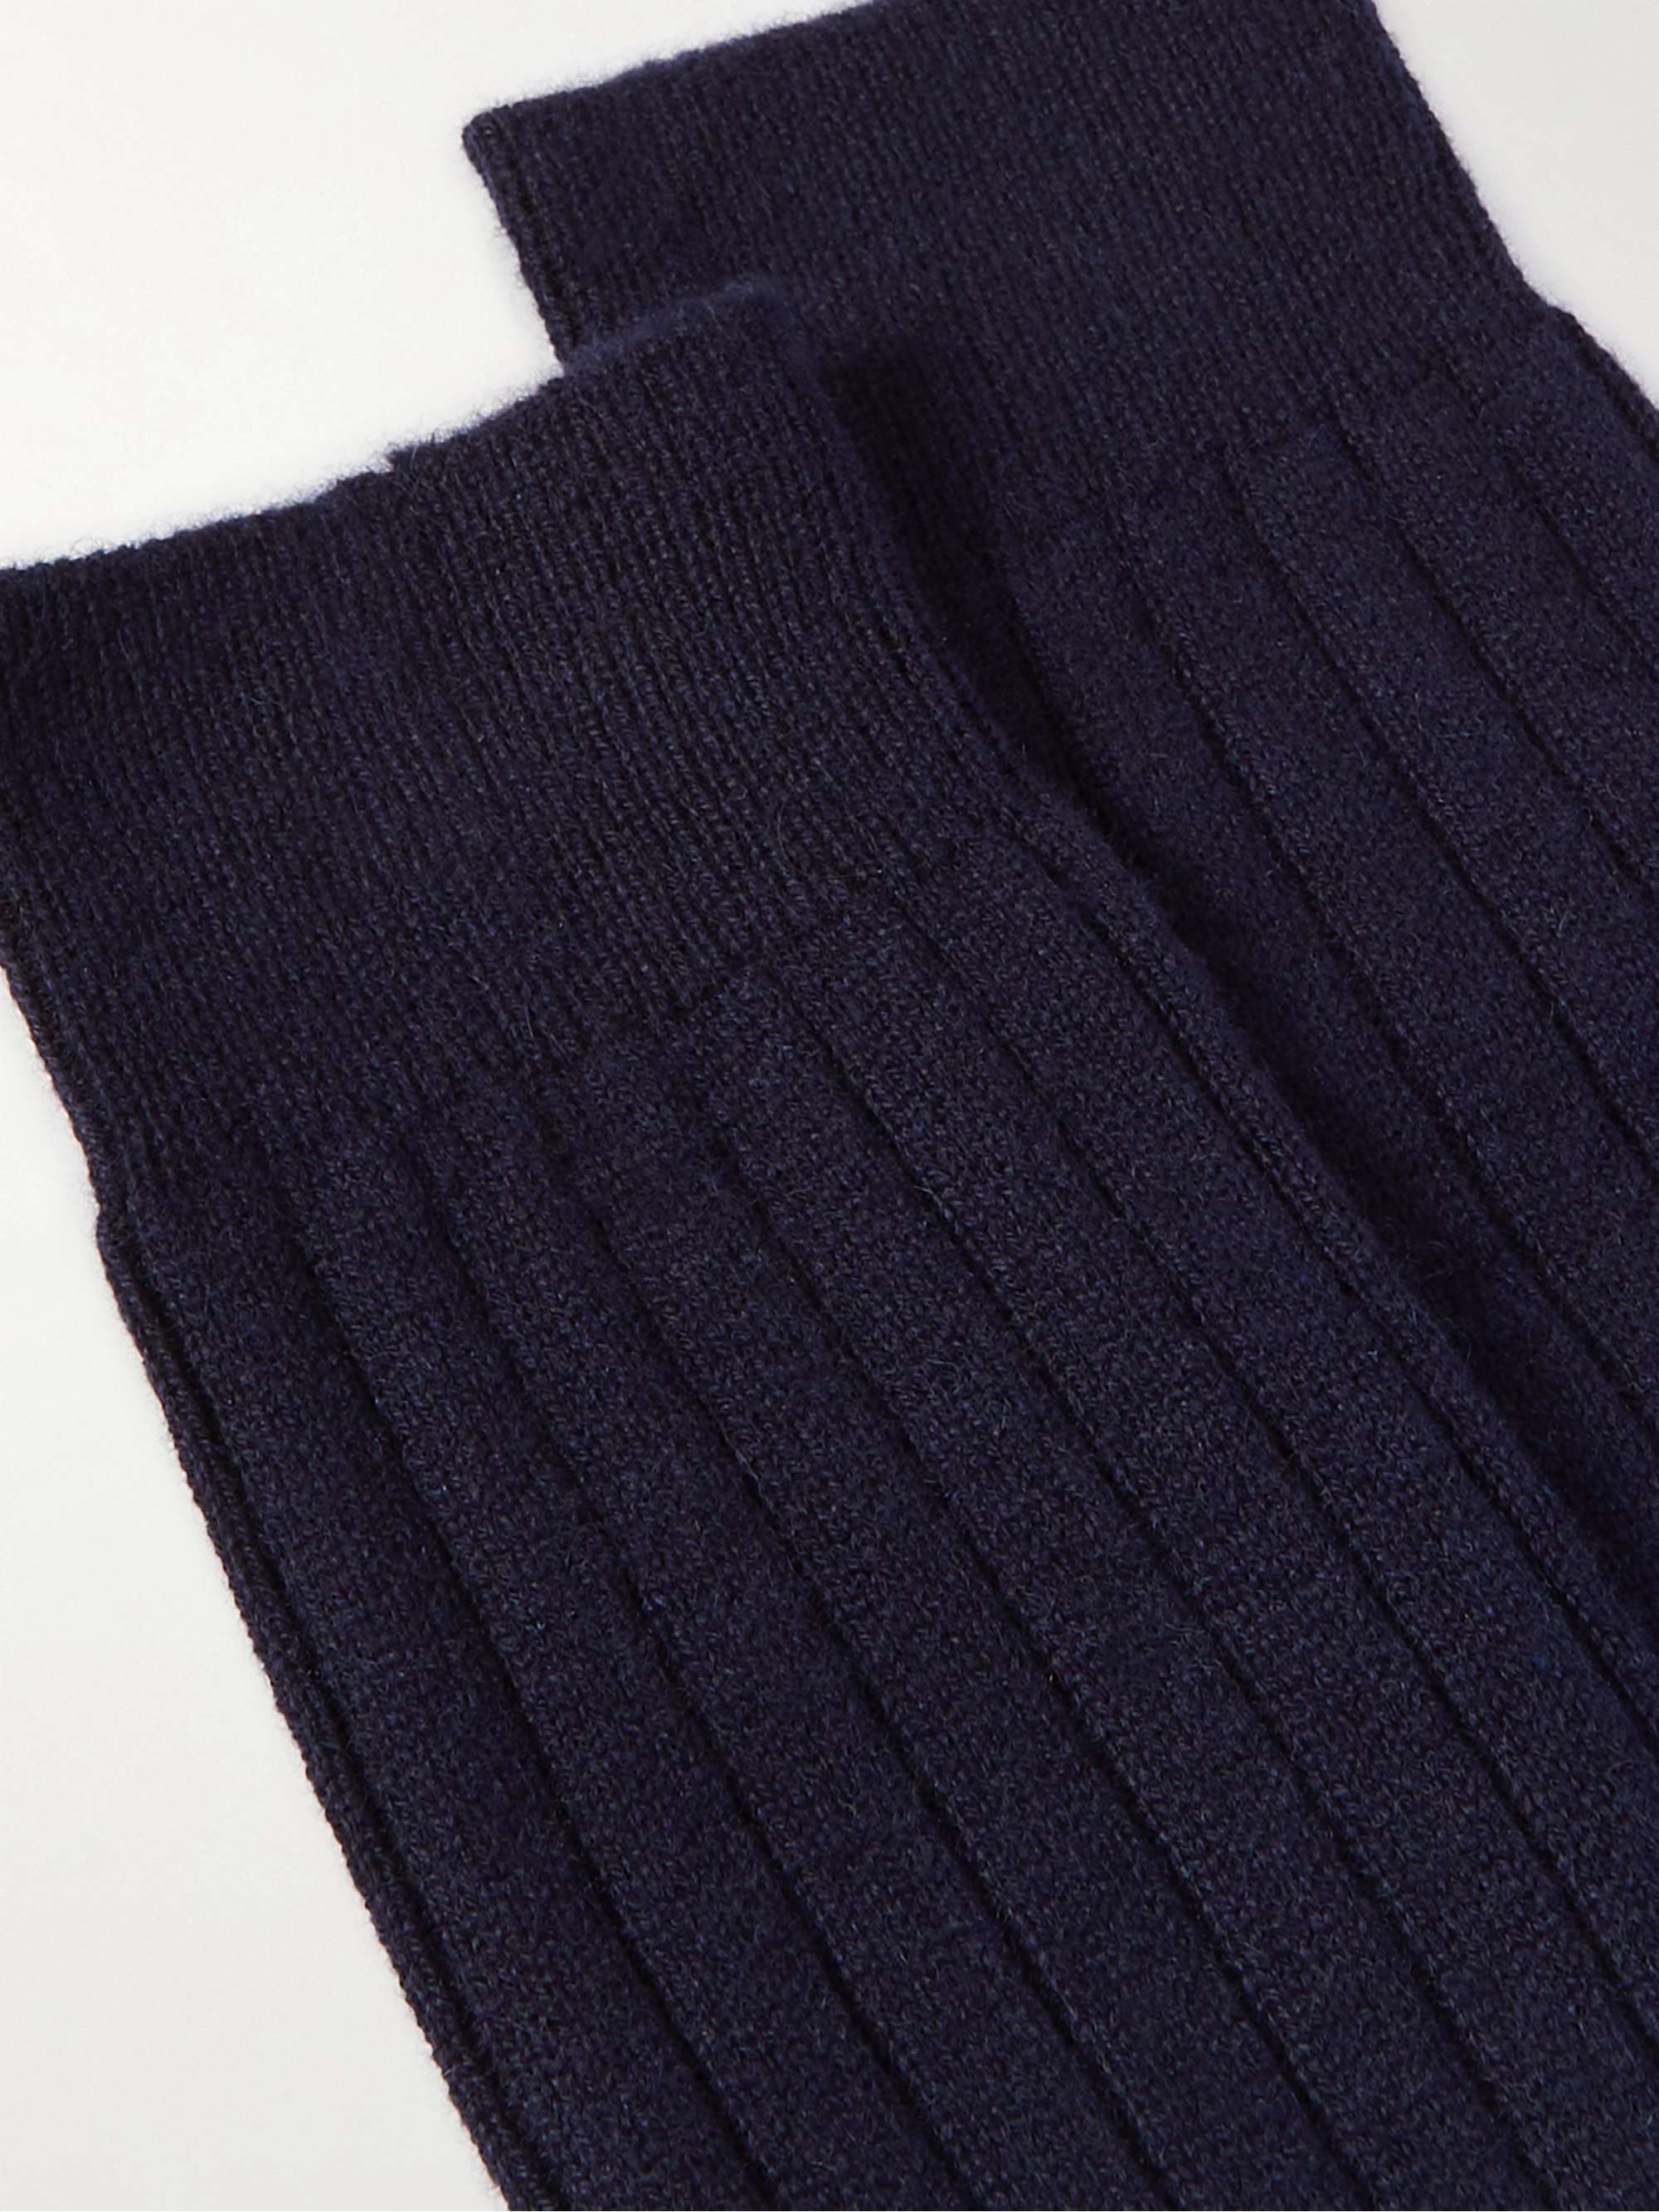 ANDERSON & SHEPPARD Ribbed Cashmere Socks